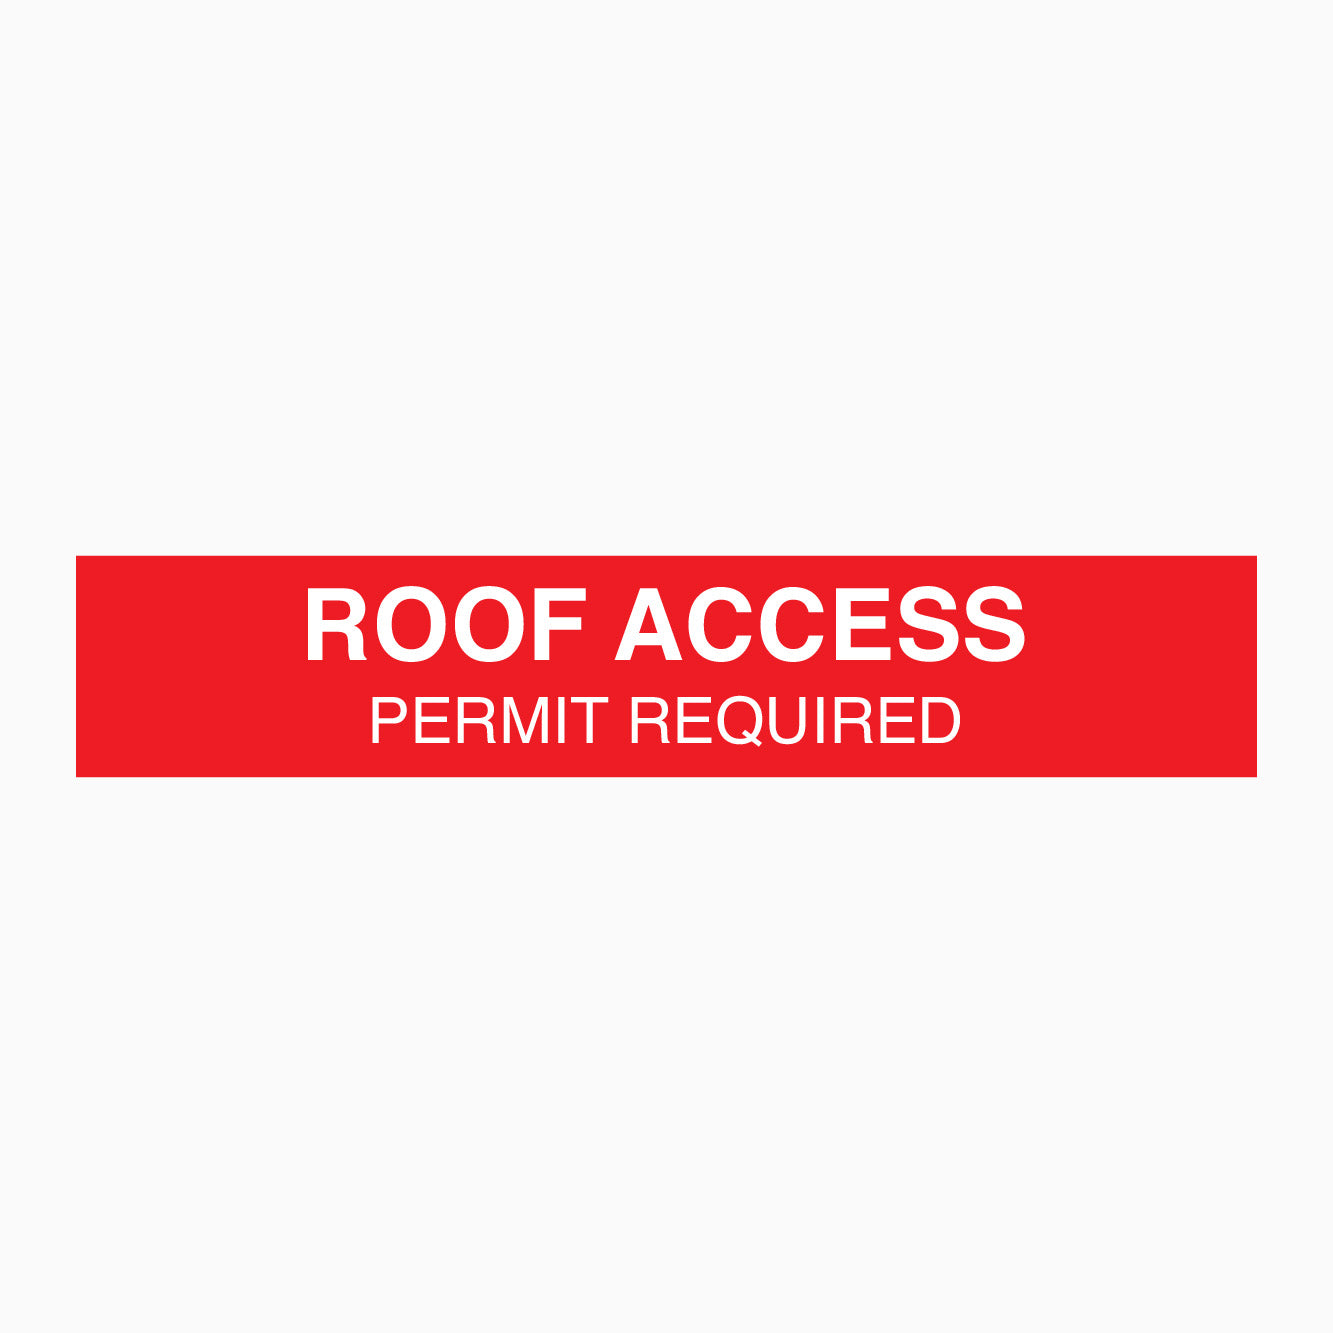 ROOF ACCESS PERMIT REQUIRED SIGN